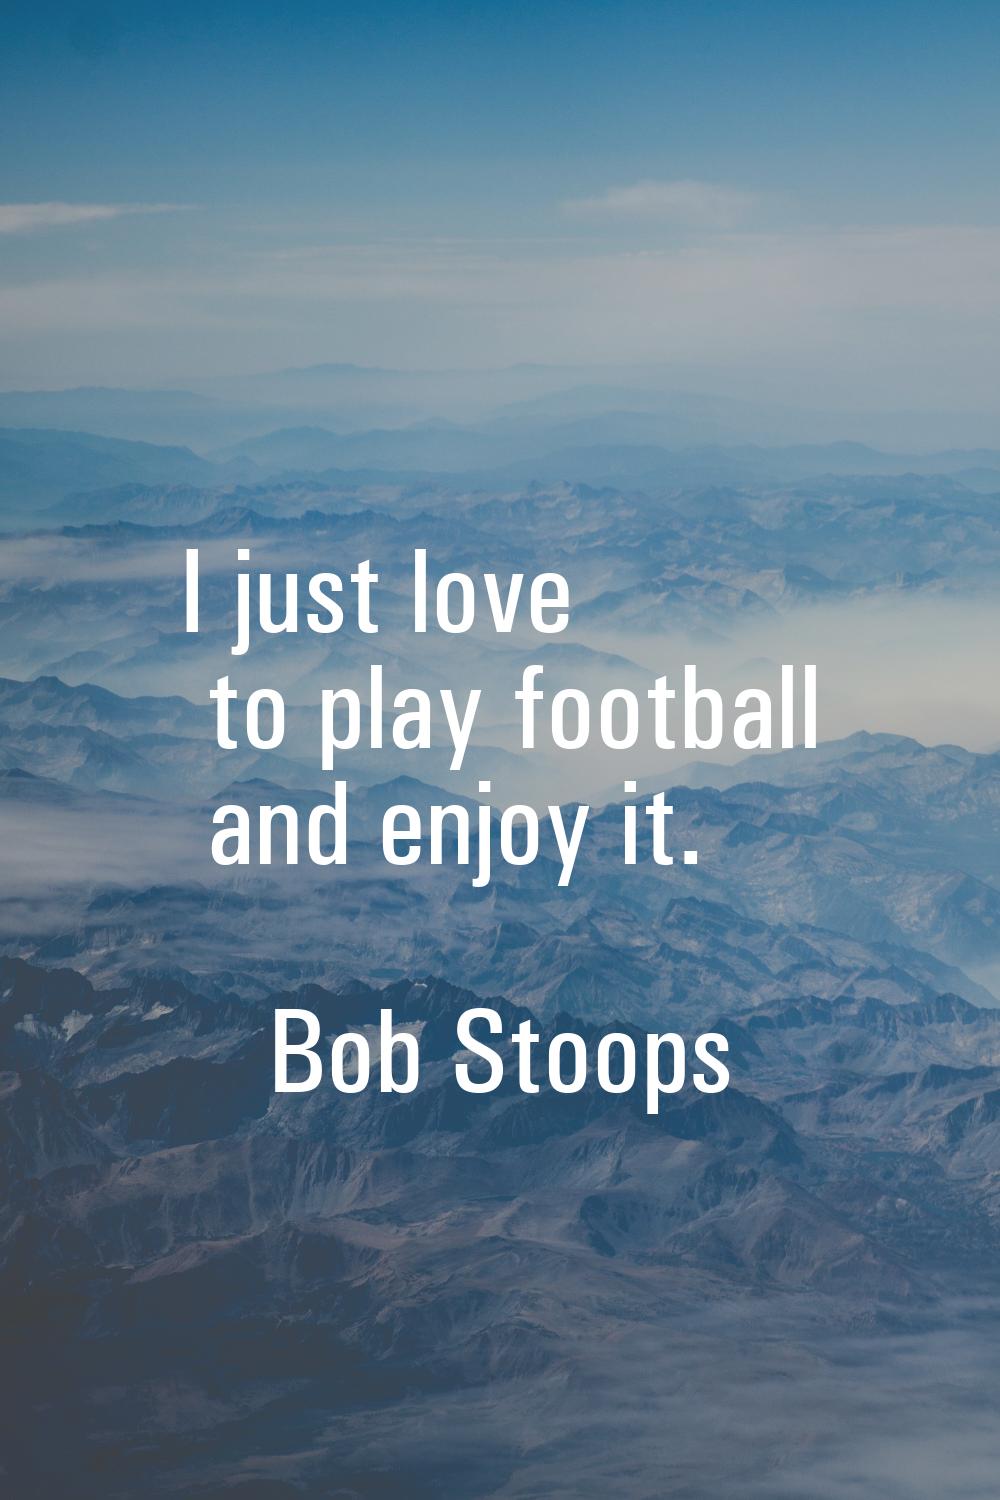 I just love to play football and enjoy it.